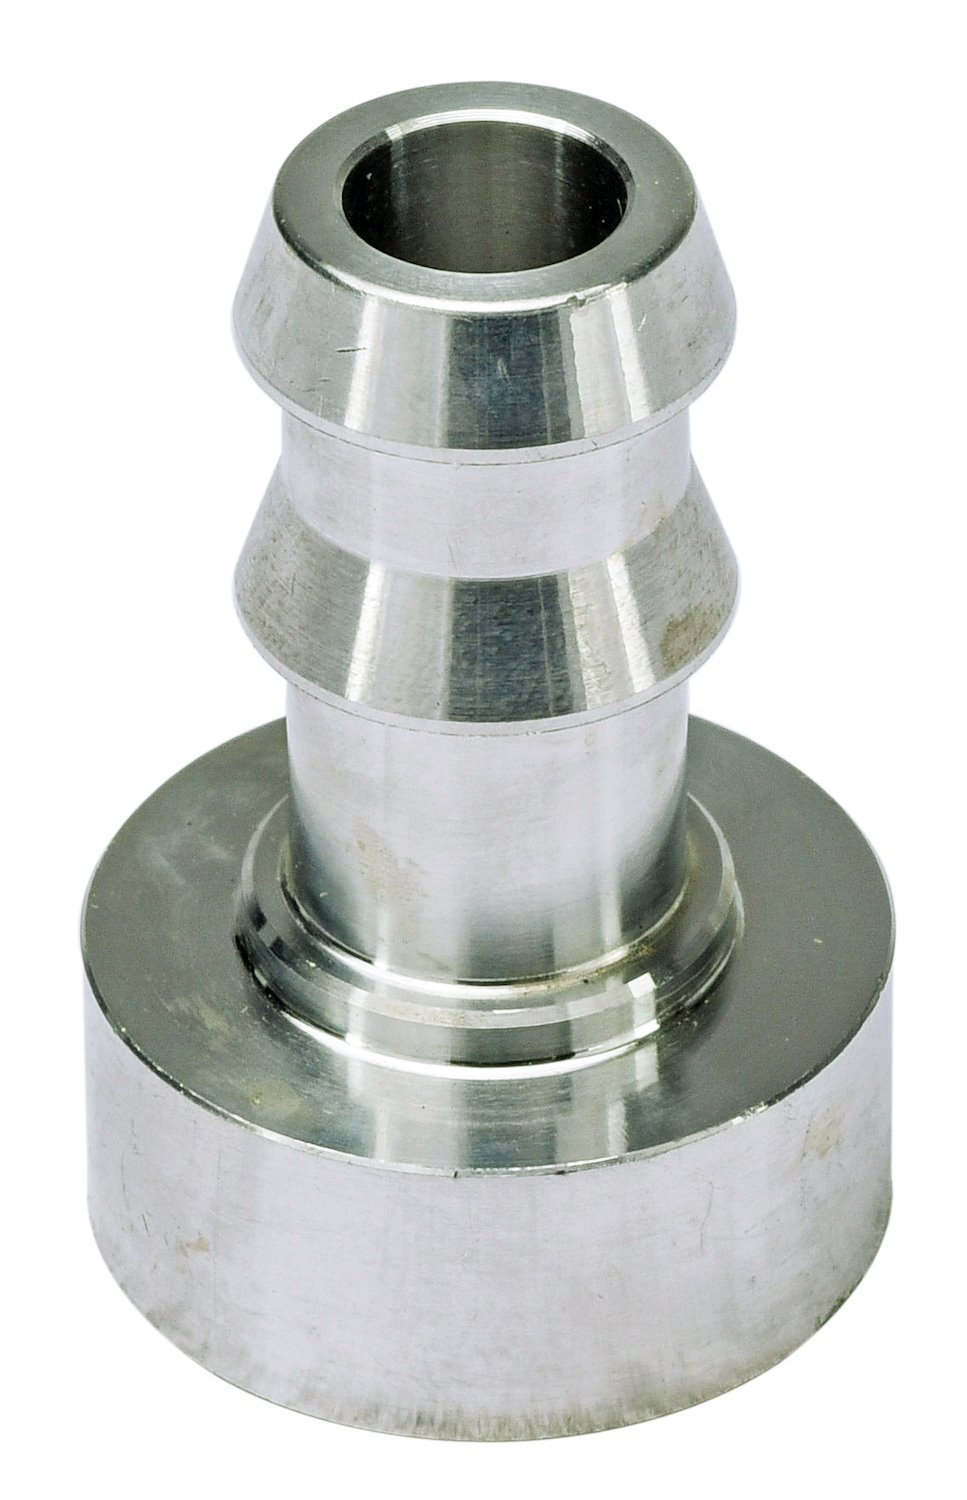 Weld-On Hose Barb Fitting with 1/2 in. Hose Barb [Steel]